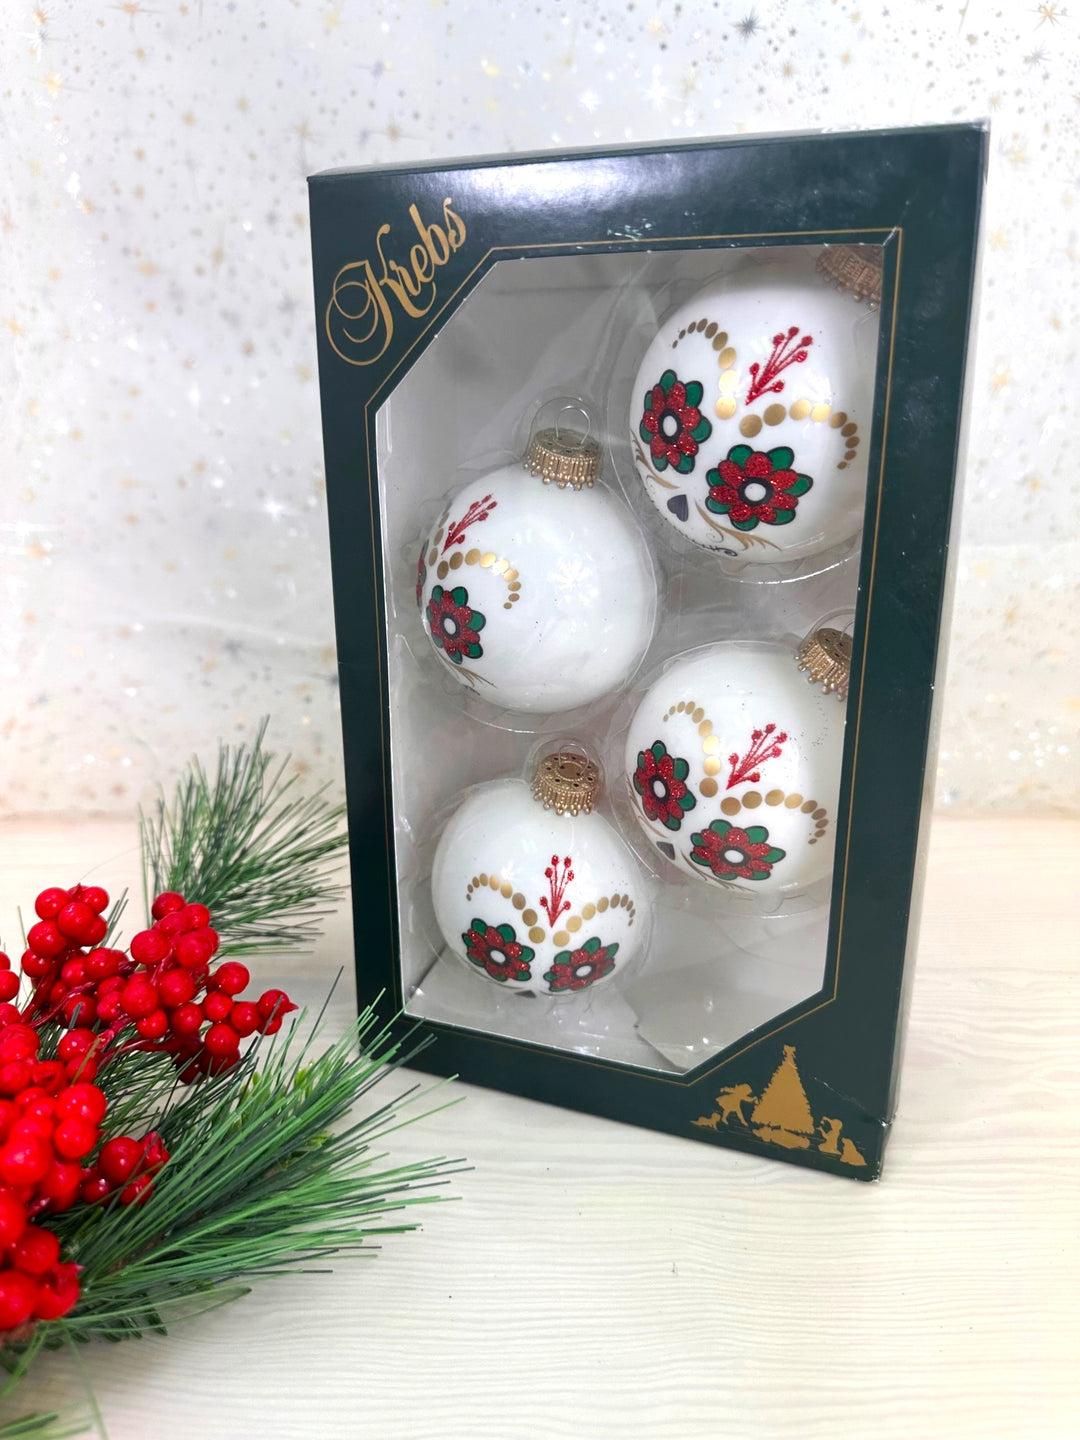 2 5/8" (67mm) Halloween Ball Ornaments Solid Porcelain White Day of the Dead with Flower Eyes 4/Box, 12/Case, 48 Pieces